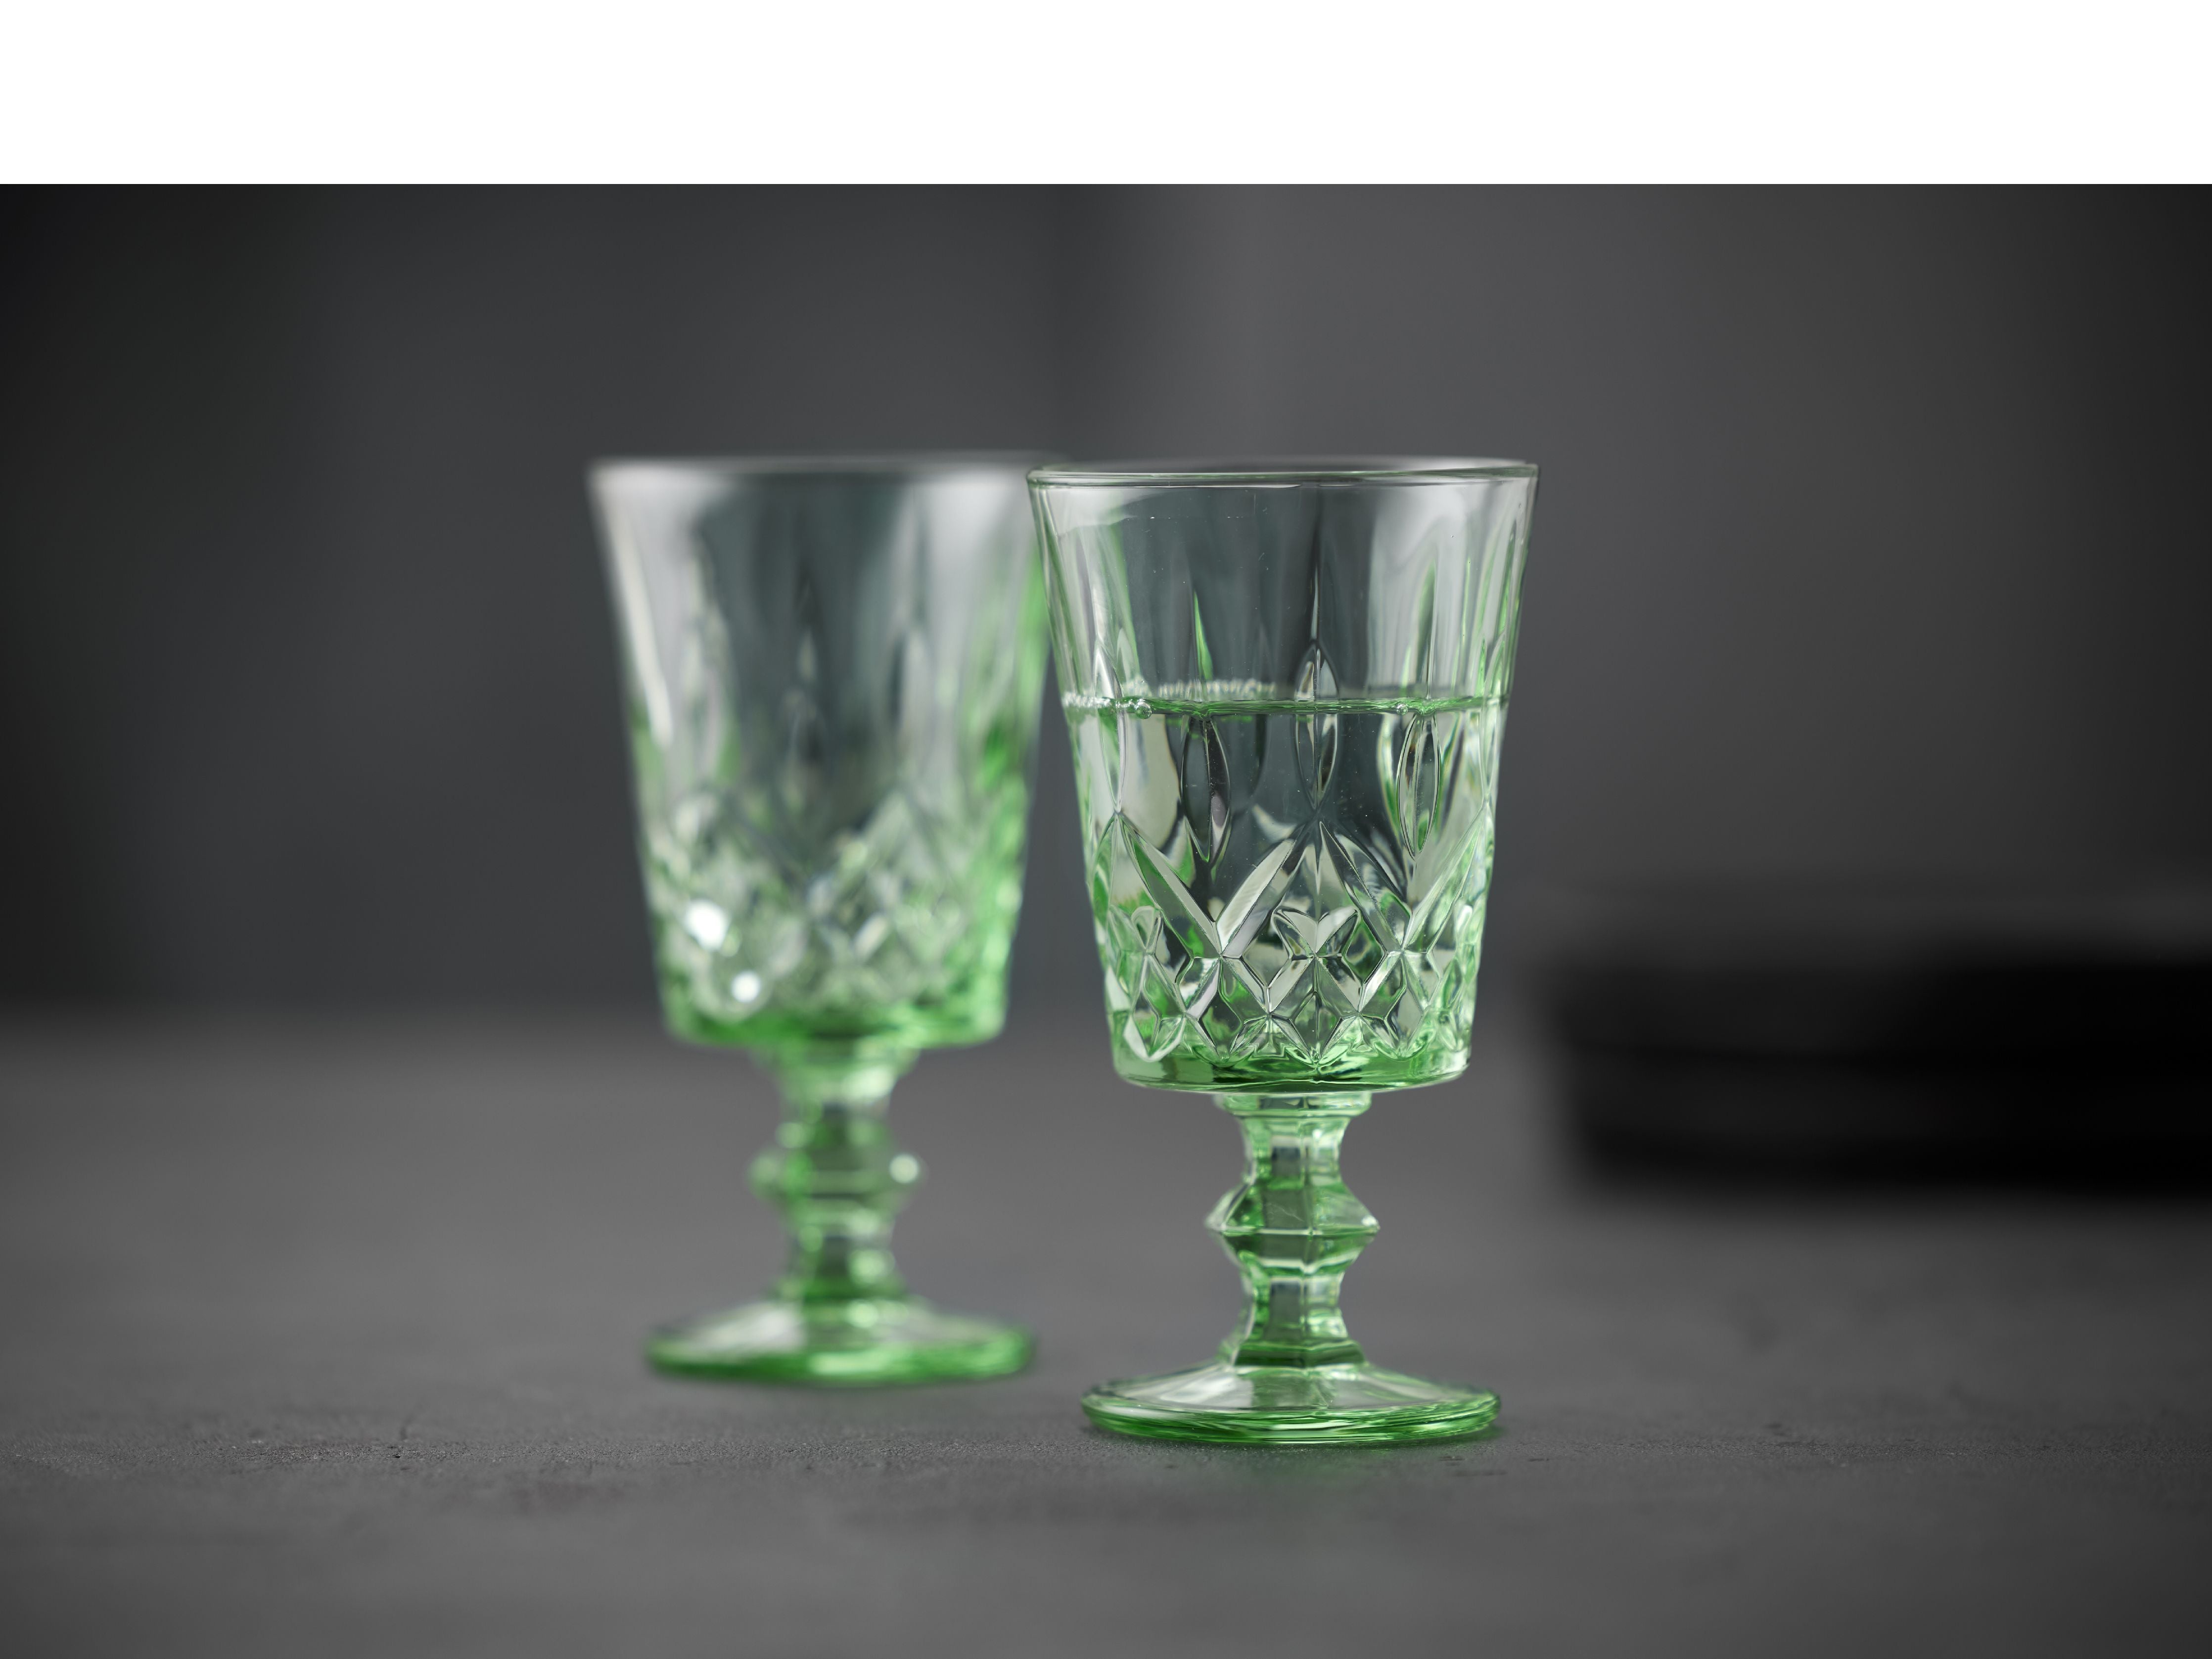 Lyngby Glas Sorrento酒杯29 Cl 4 PC。，绿色